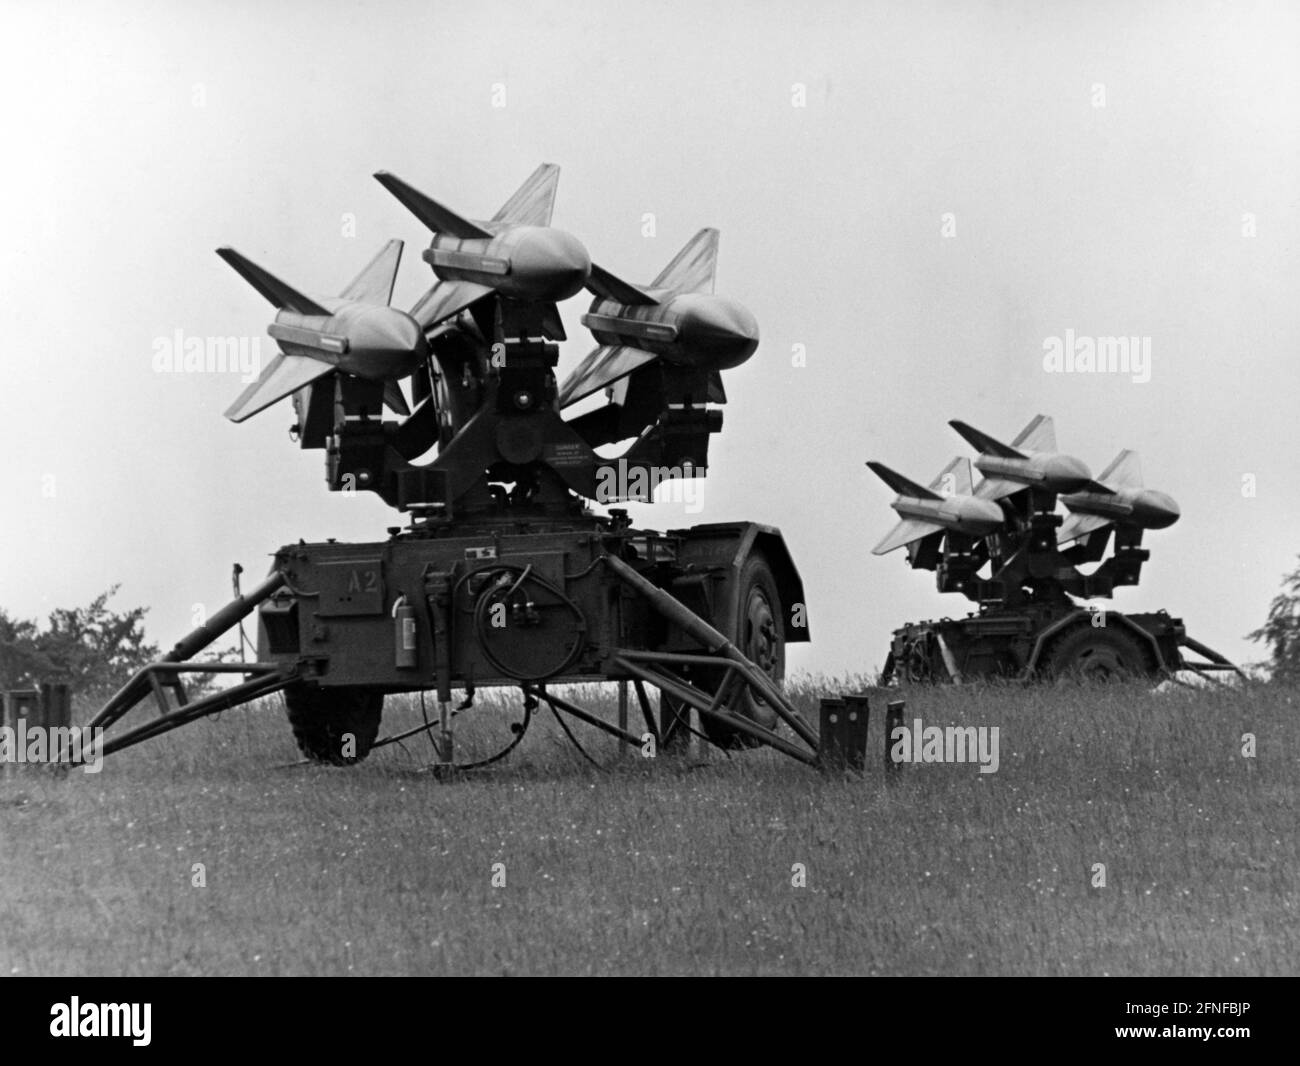 The Hawk missile was introduced into the Bundeswehr in the course of the 60s. Because of its great susceptibility to error and high complexity, it was given some joke names in the troops such as, Hinkelstein AbWurf Katapult or Heute Alles Wieder Kaputt. [automated translation] Stock Photo